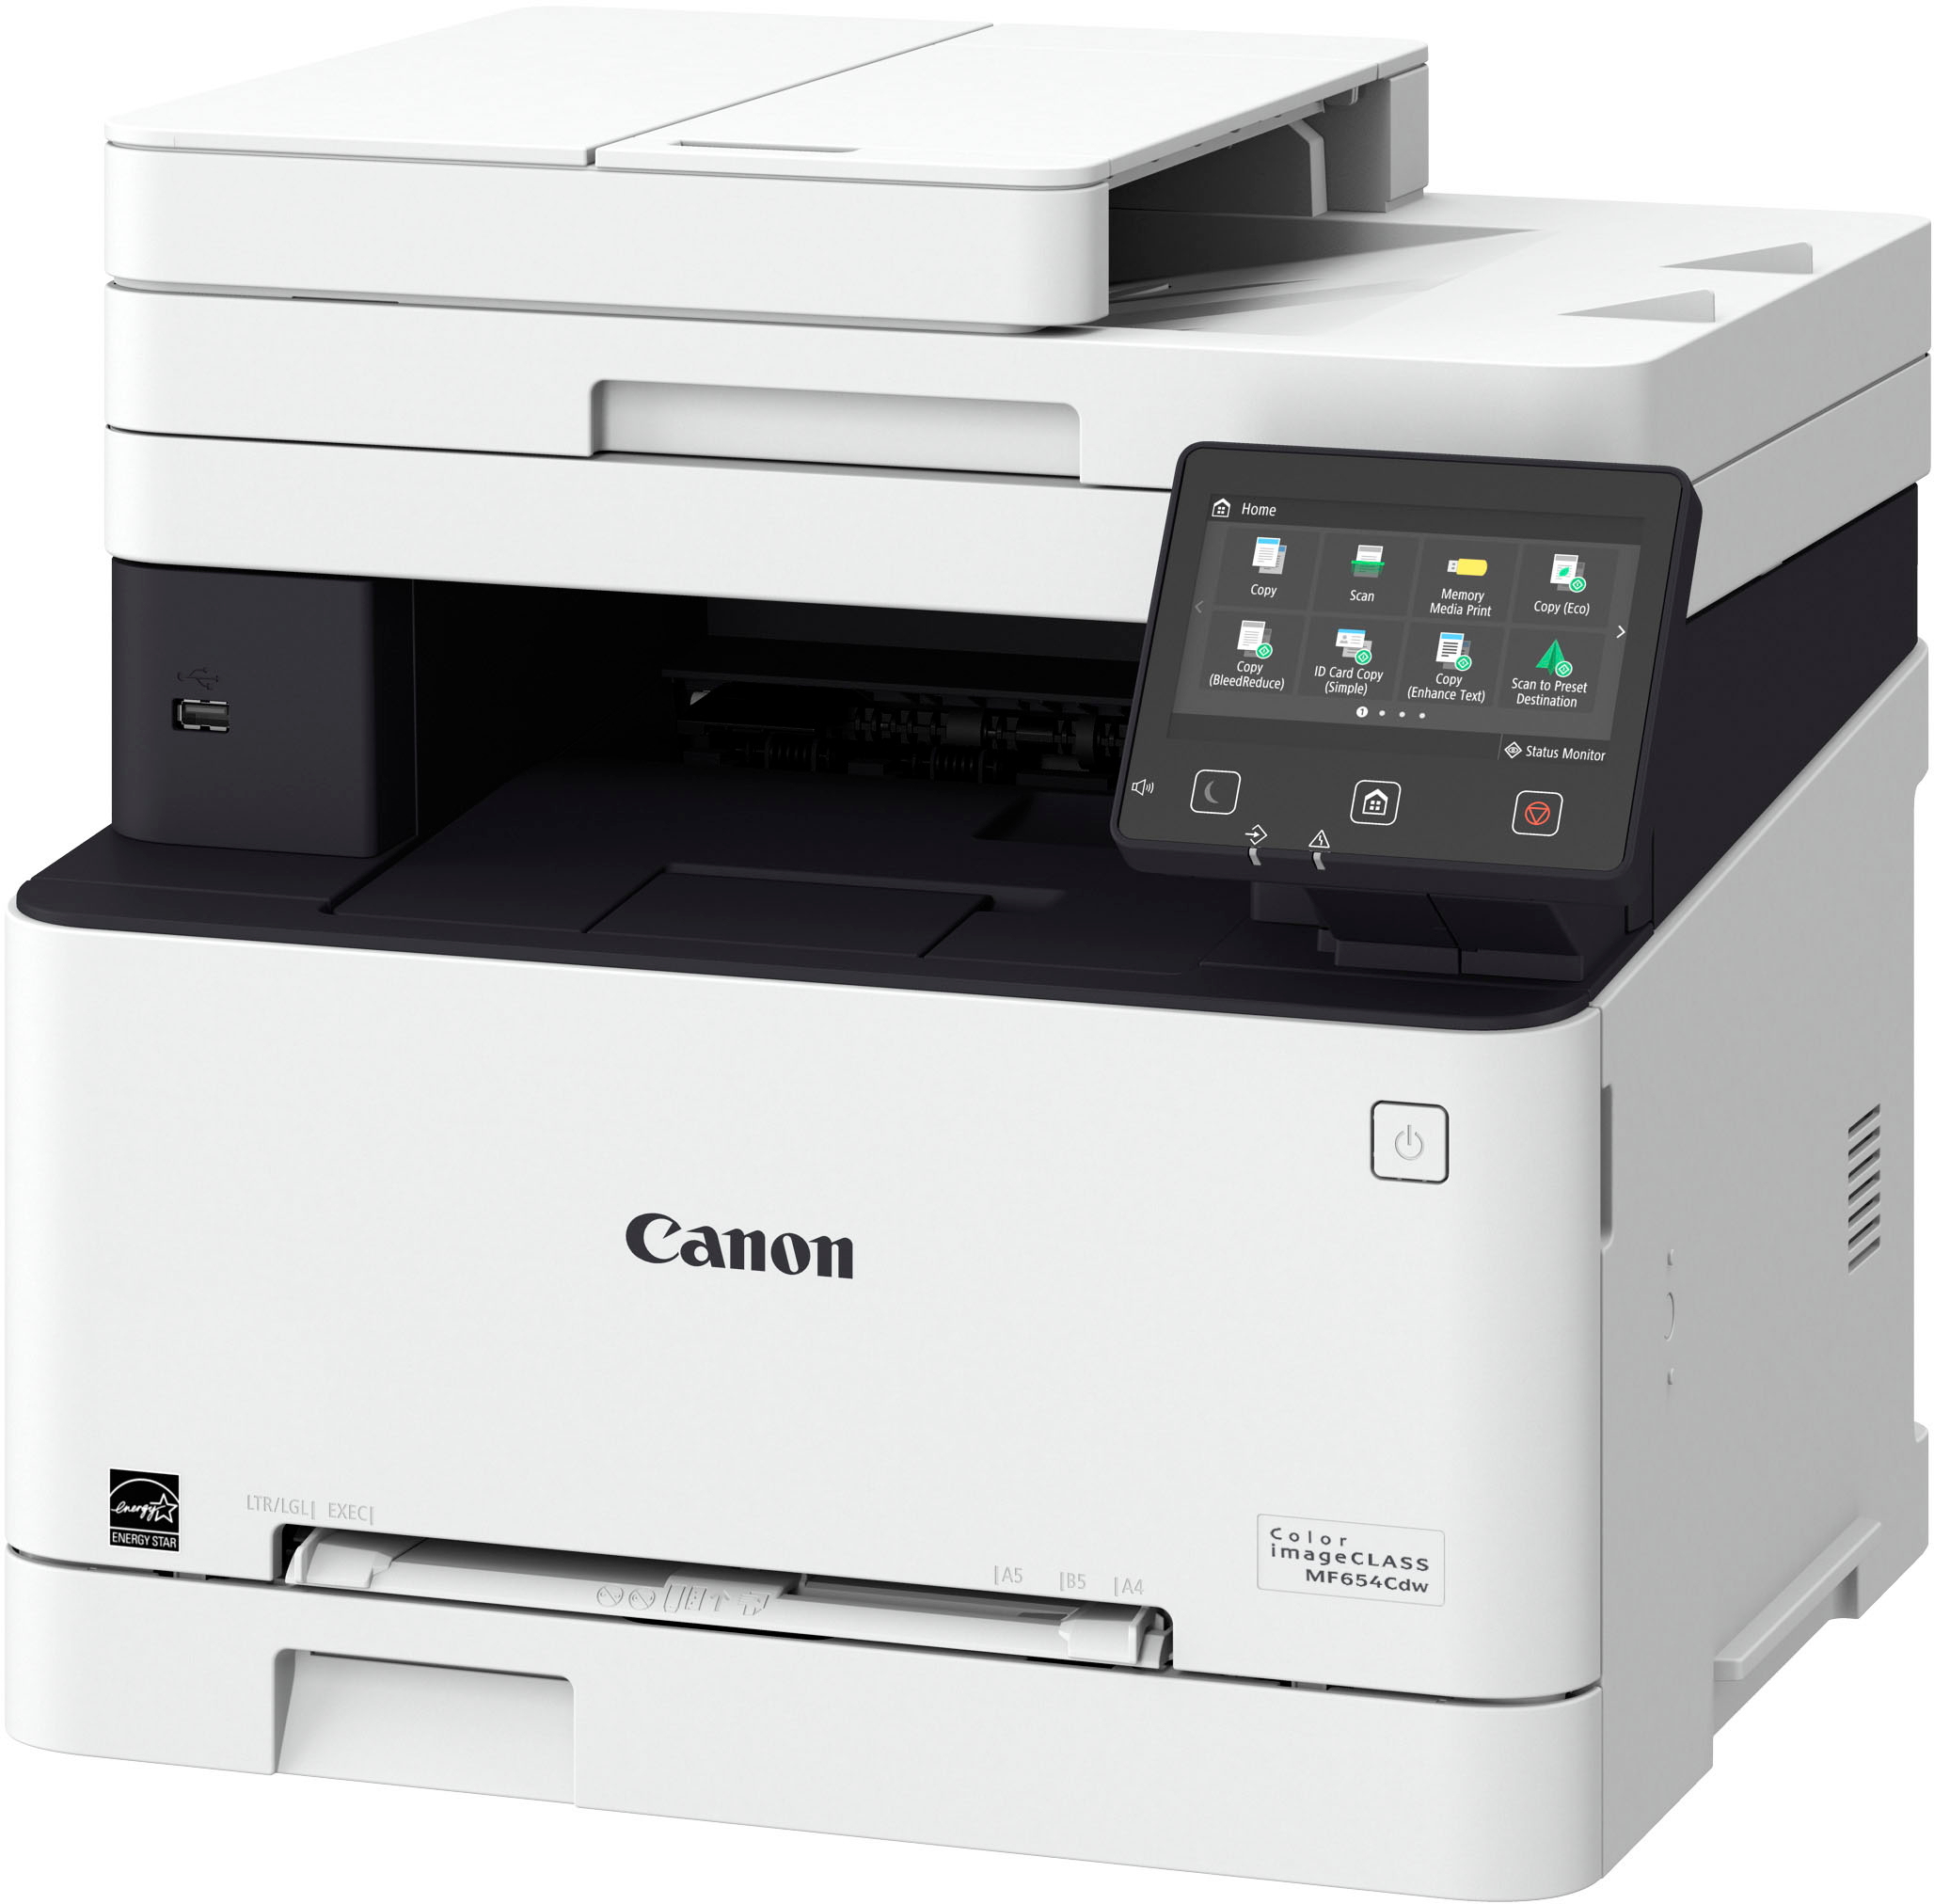 Angle View: Canon - imageCLASS MF654Cdw Wireless Color All-In-One Laser Printer - White